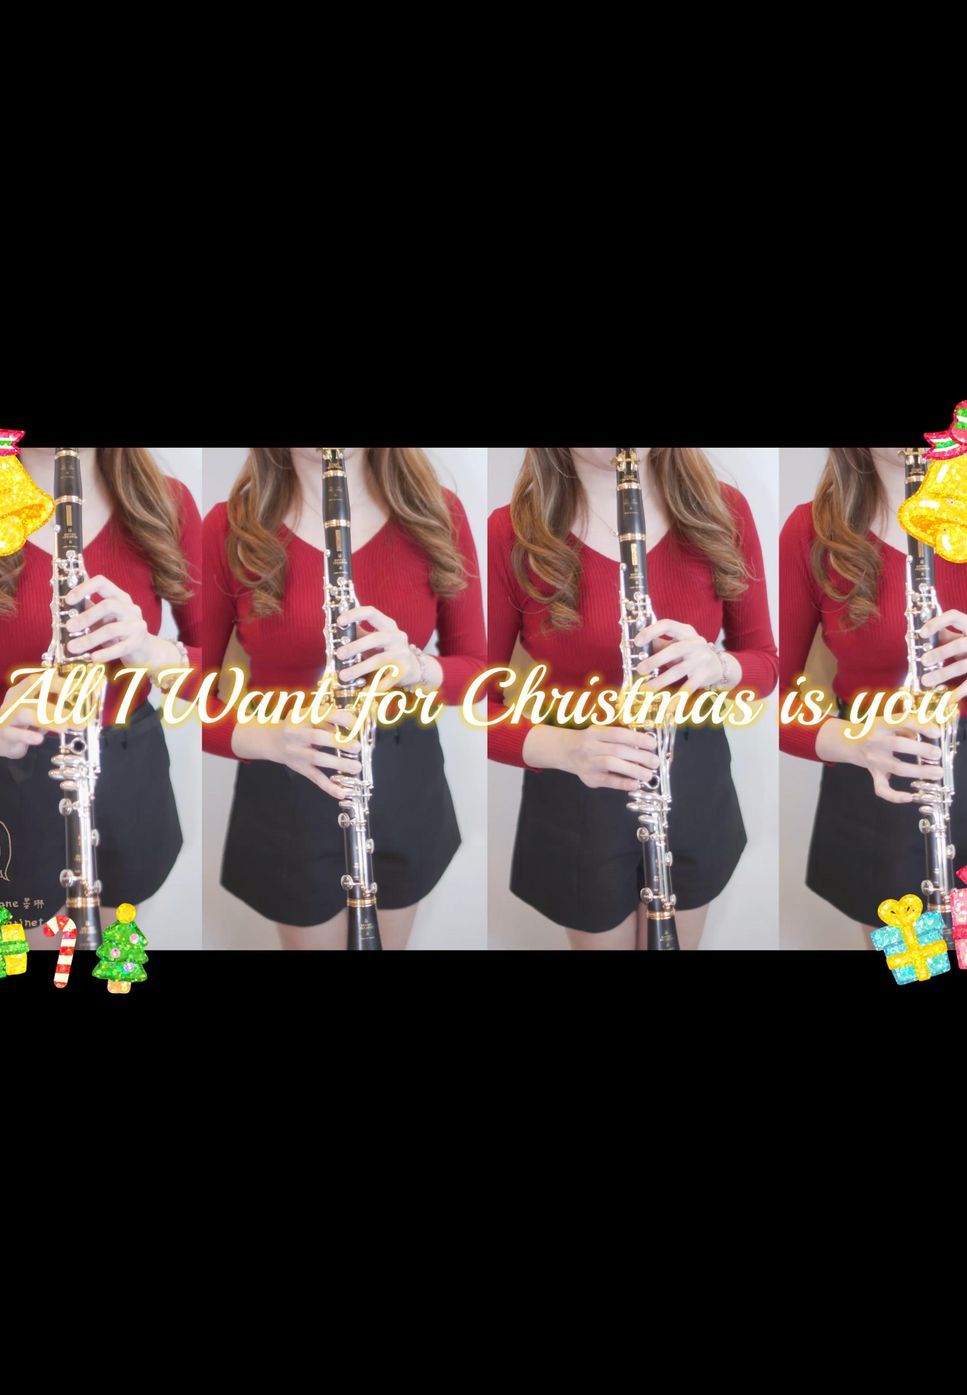 Mariah Carey - All I Want for Christmas Is You (clarinet quartet) by 郭晏琳JANE